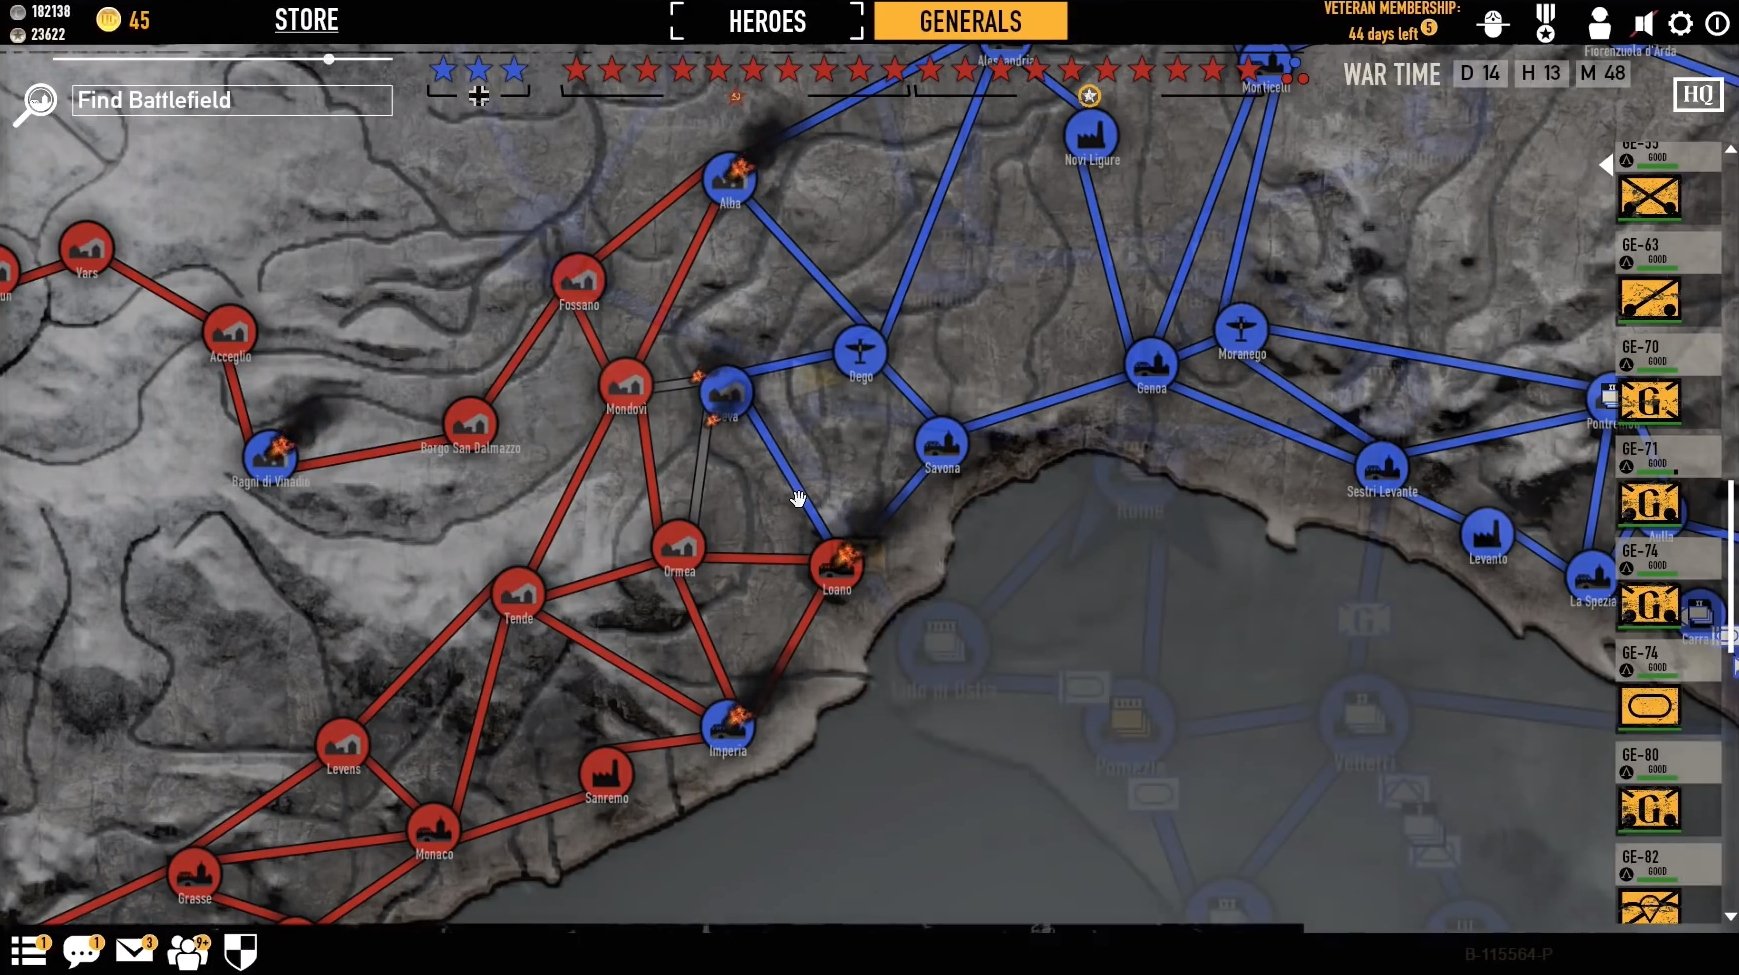 FPS battles spawned by confrontations on the strategy map